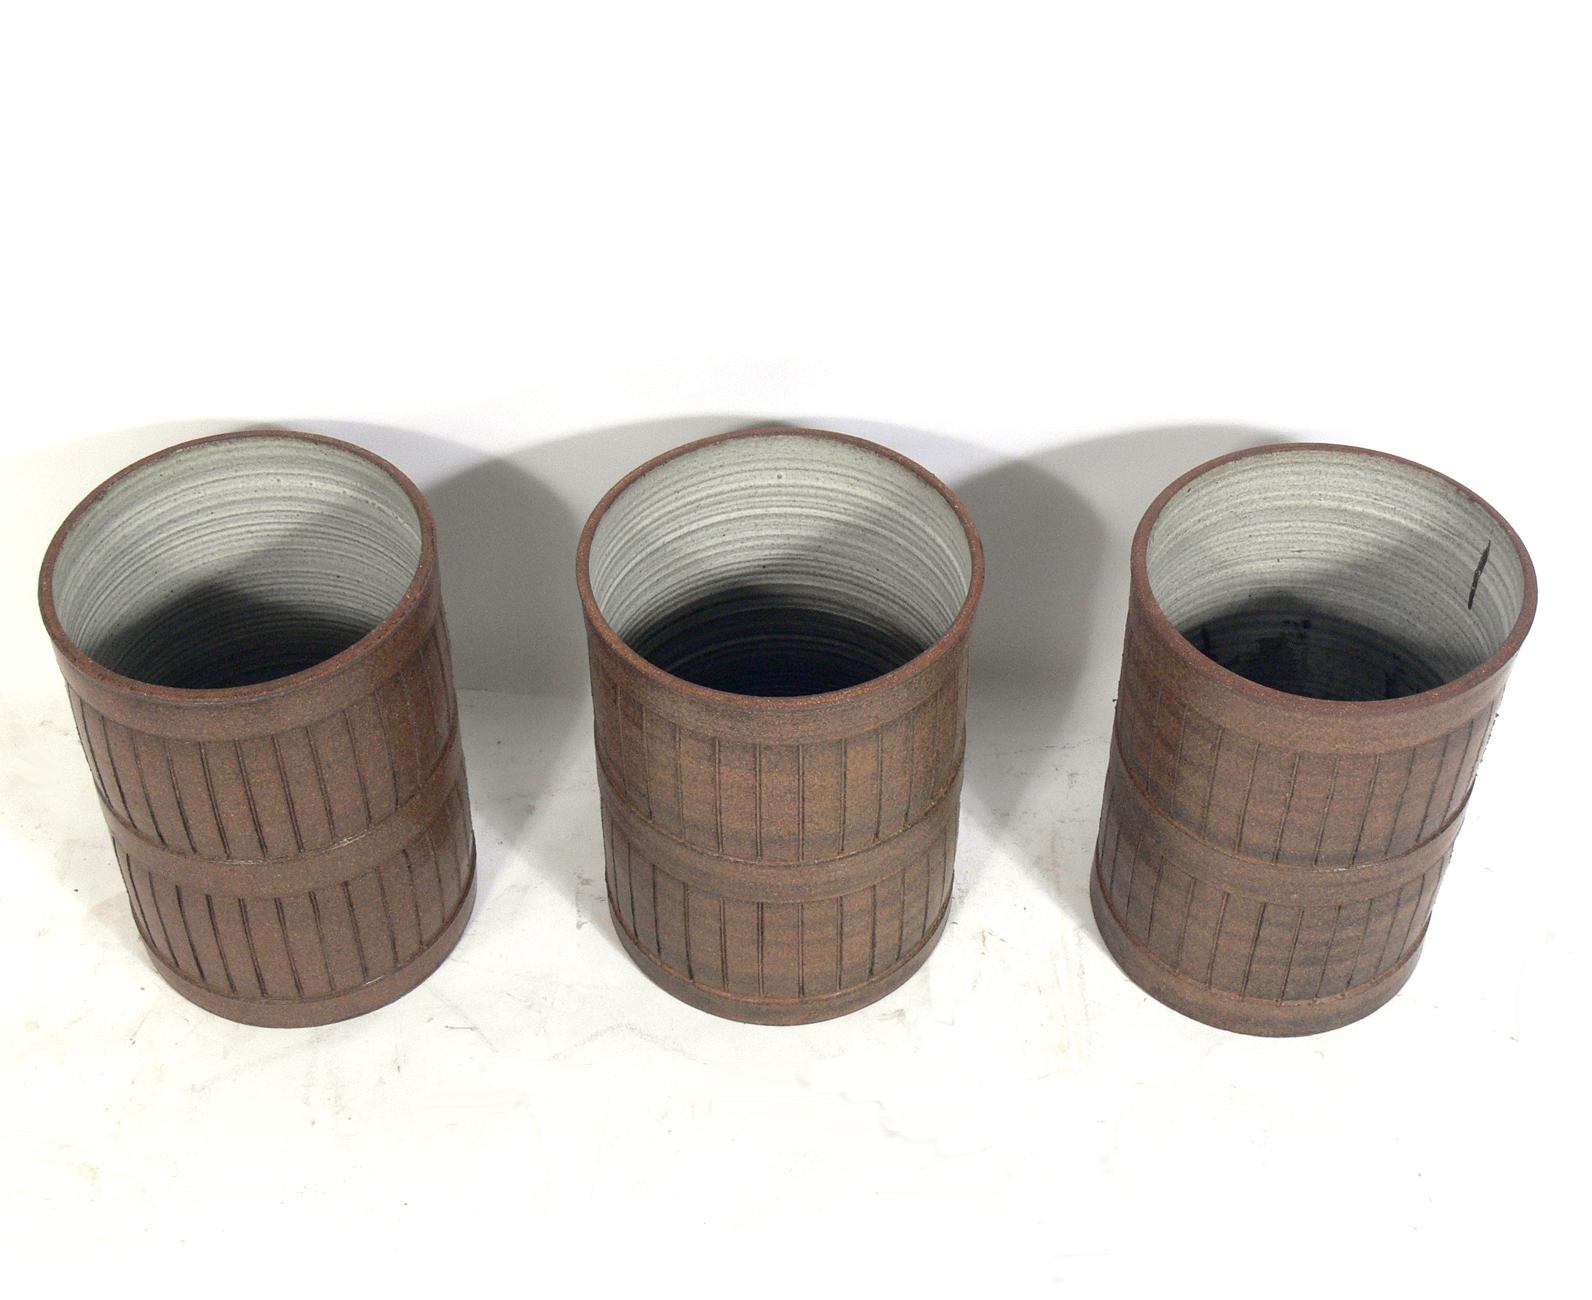 Midcentury ceramic planters, American, circa 1960s. These pieces are unsigned, so we are unsure of the ceramicist, but the estate where they were purchased from told us they were purchased in California. They have clean lined incised decoration and